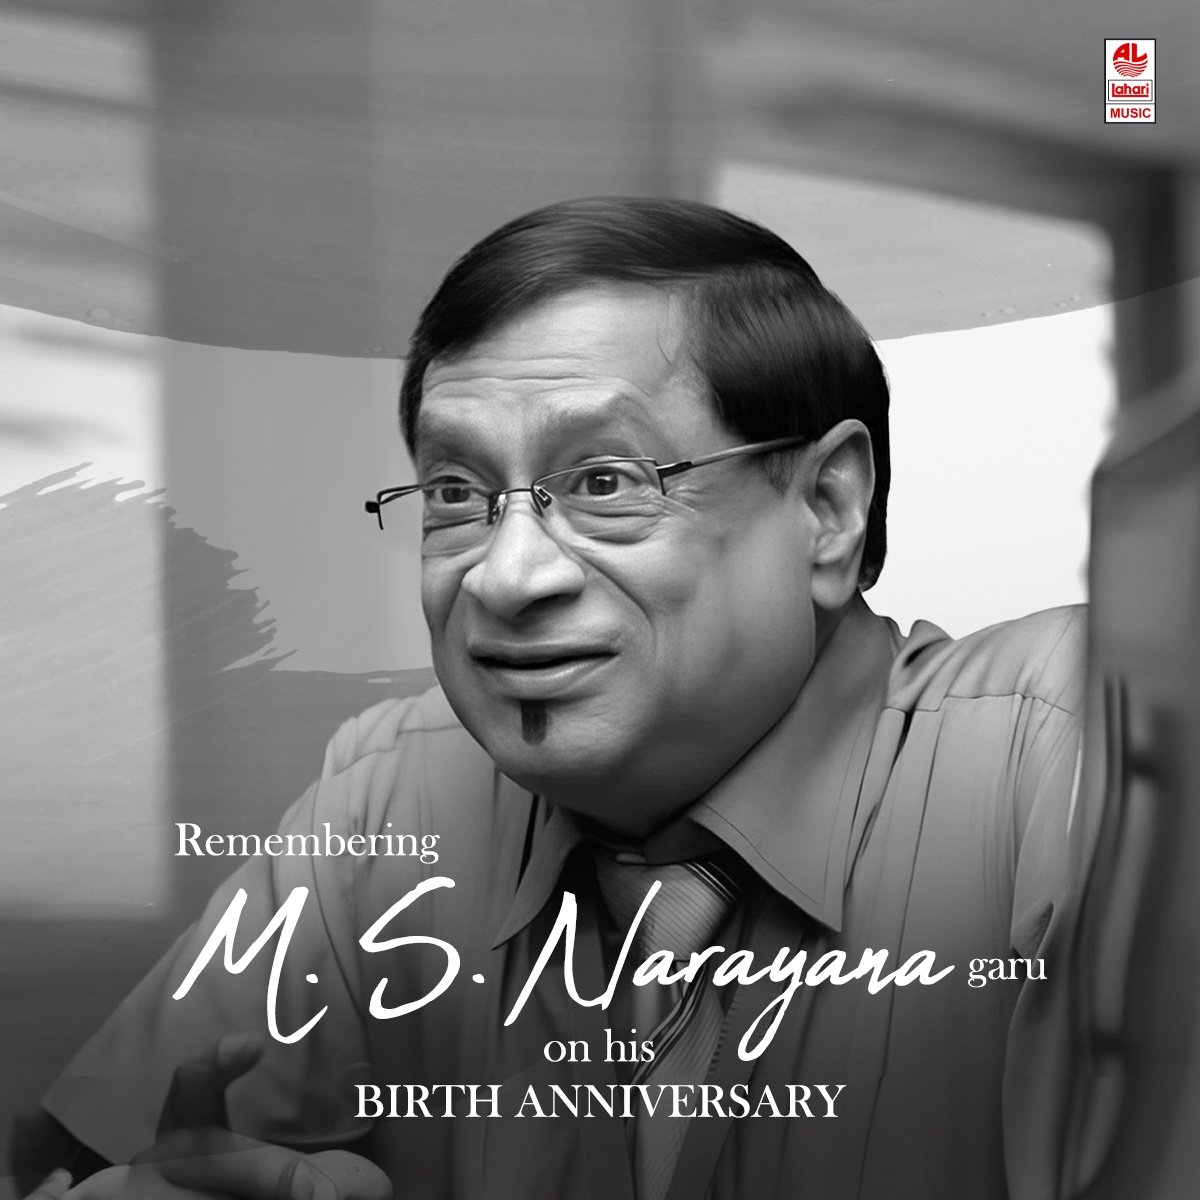 Remembering the comedy king, M.S.Narayana. Your laughter-filled performances continue to brighten our days, even in your absence. Thank you for the endless joy you brought into our lives.

#MSNarayana